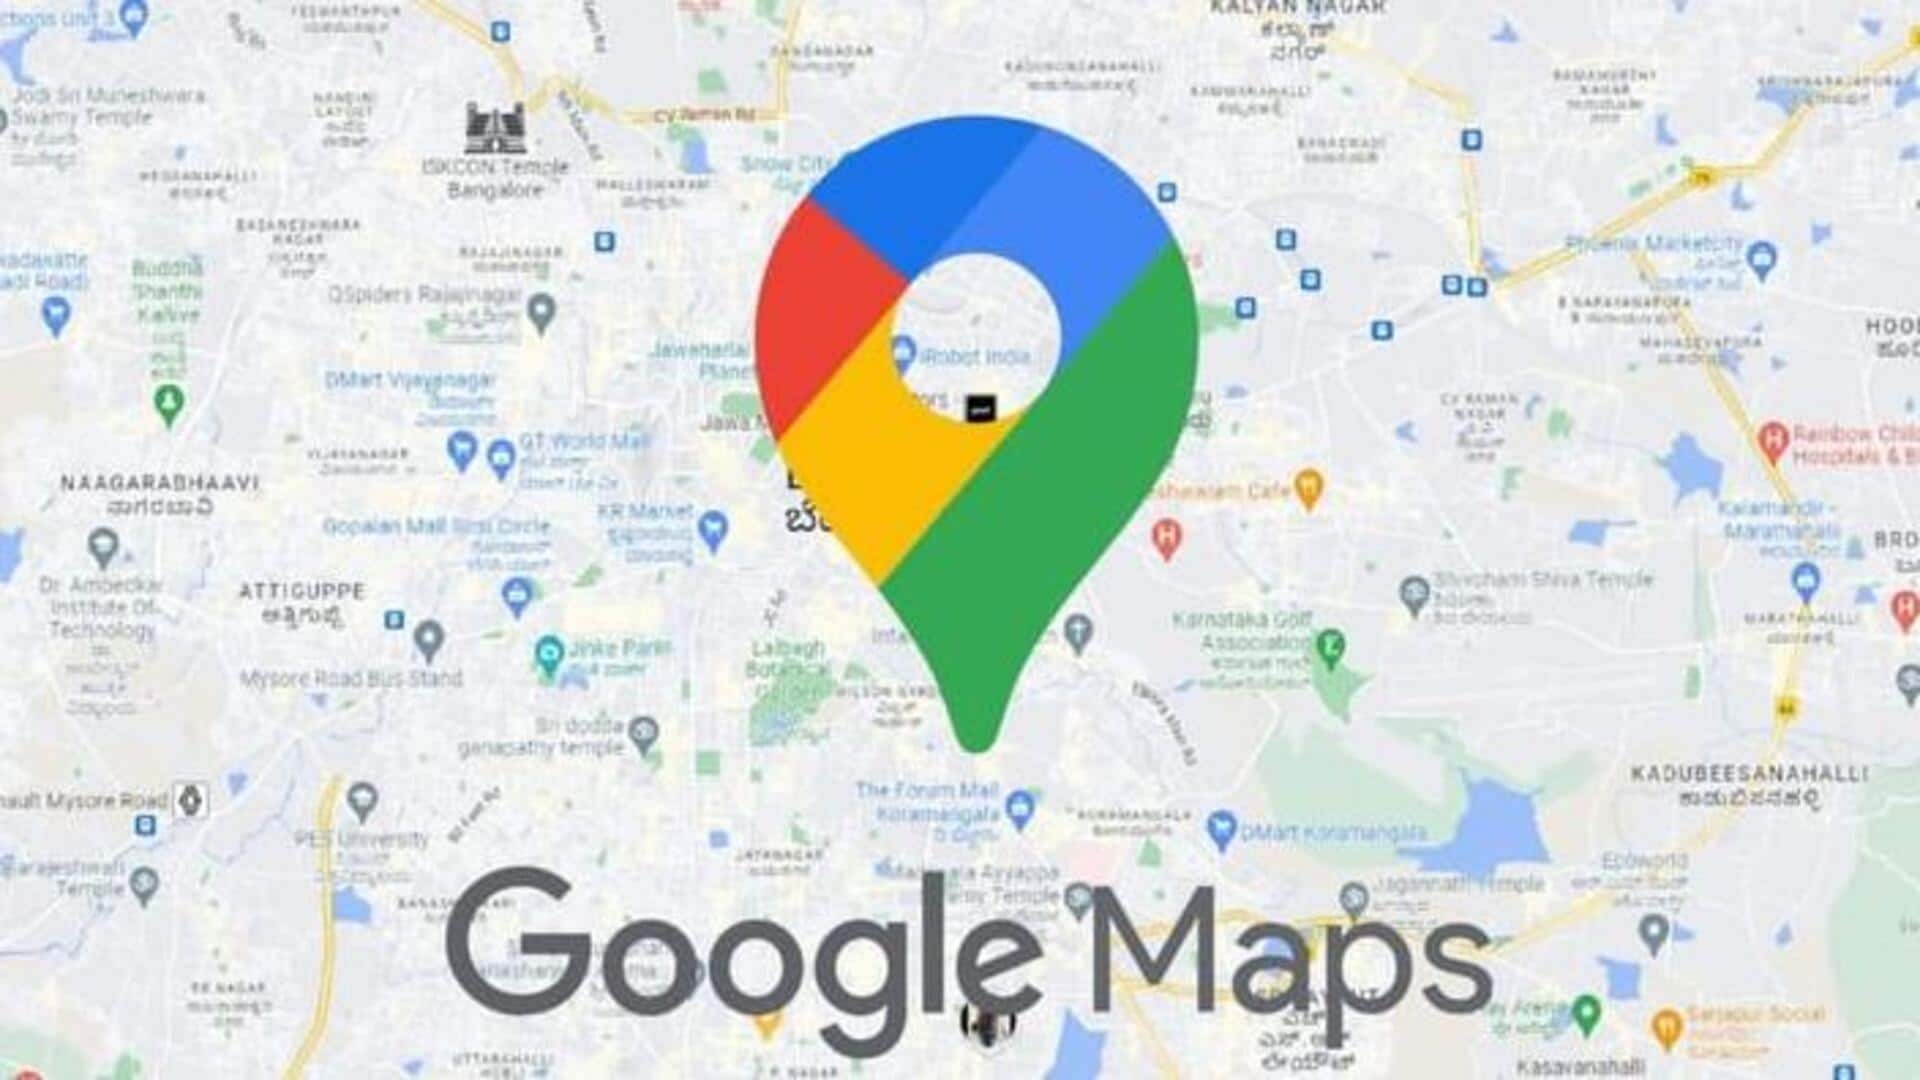 Top 5 new Google Maps features you must know